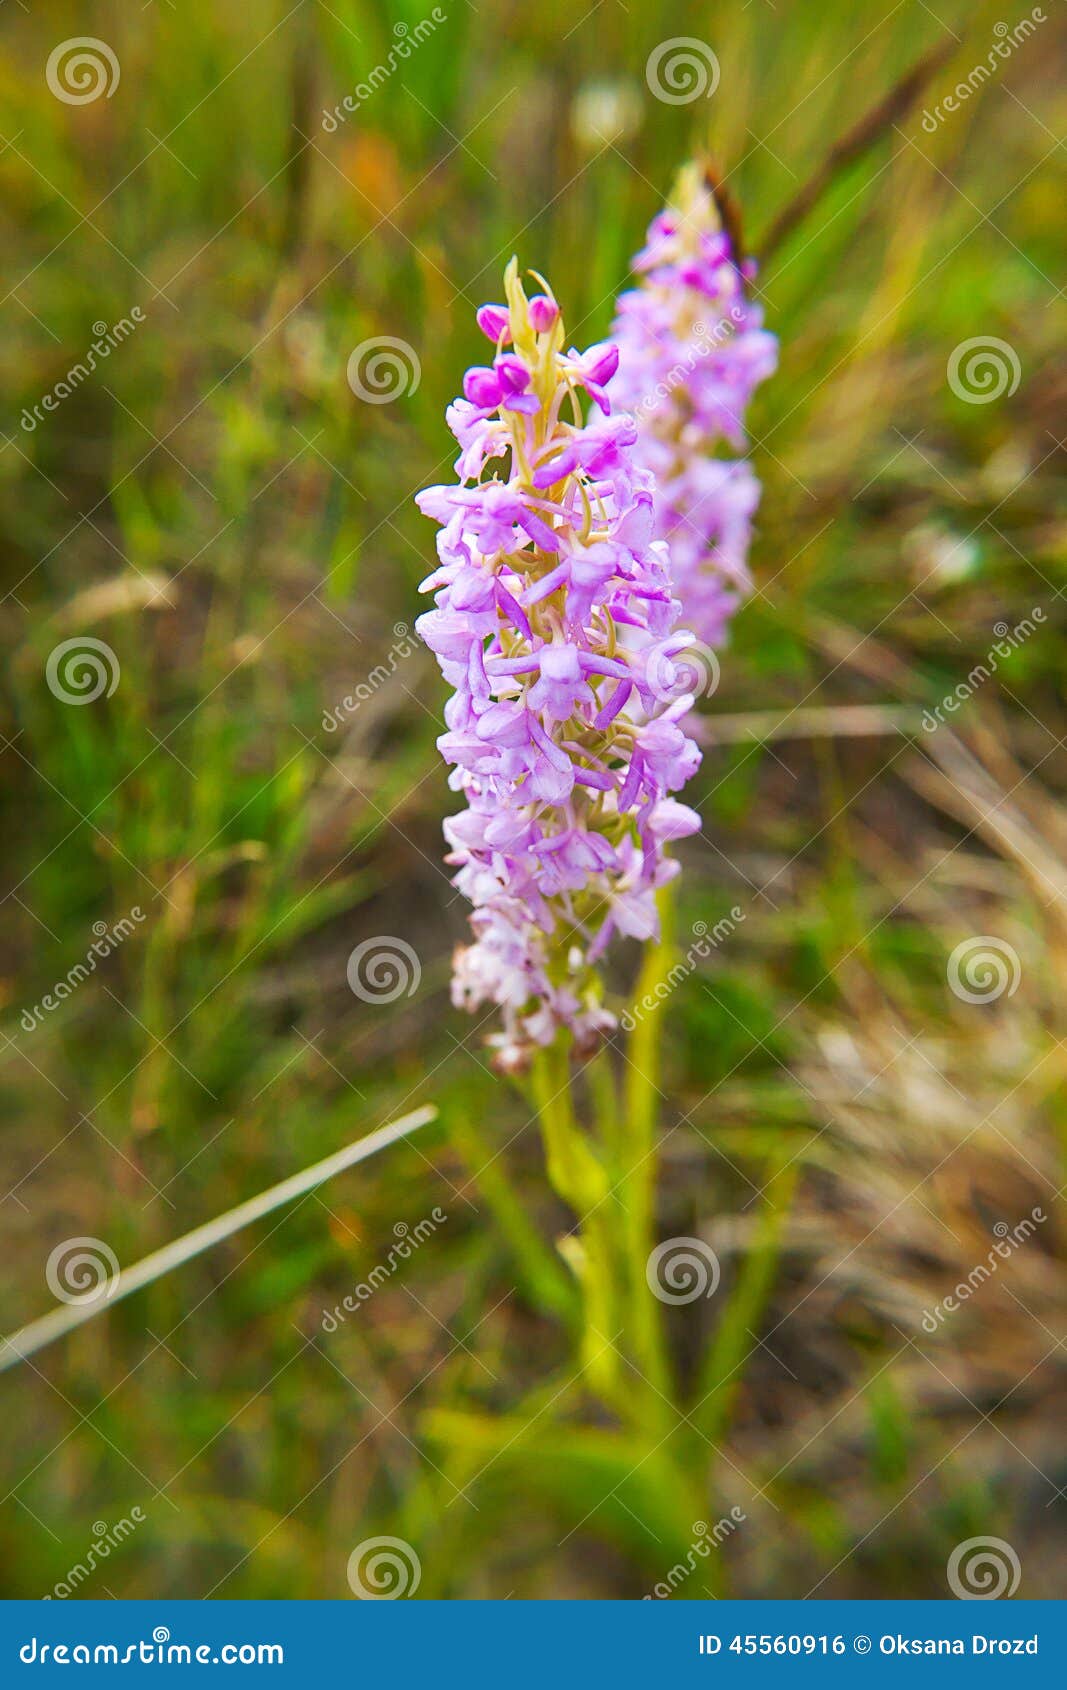 Fragrant orchid stock photo. Image of conopsea, lilac - 45560916